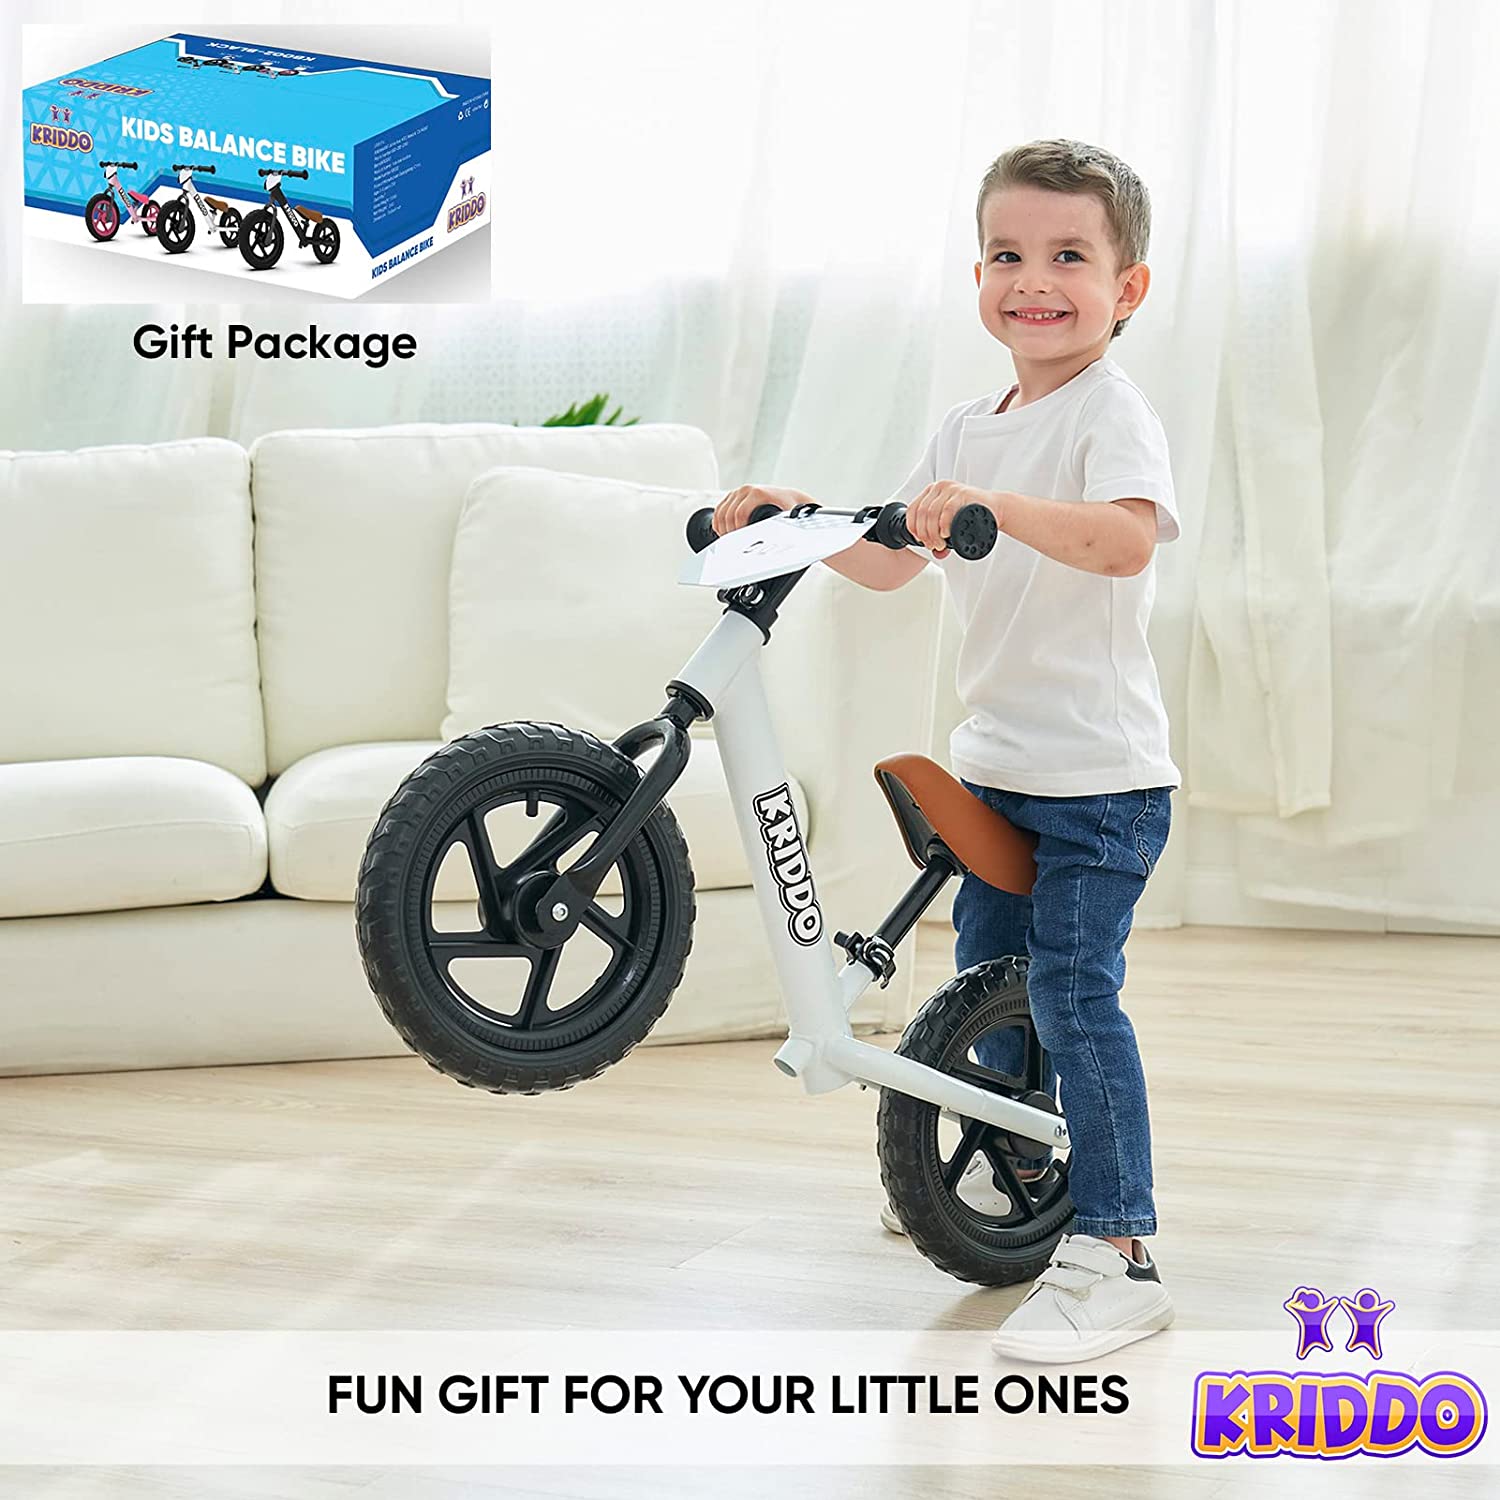 KRIDDO Toddler Balance Bike 2 Year Old, Age 18 Months to 5 Years Old, 12 Inch Push Bicycle with Customize Plate (3 Sets of Stickers Included), Steady Balancing, Gift Bike for 2-3 Boys Girls, White